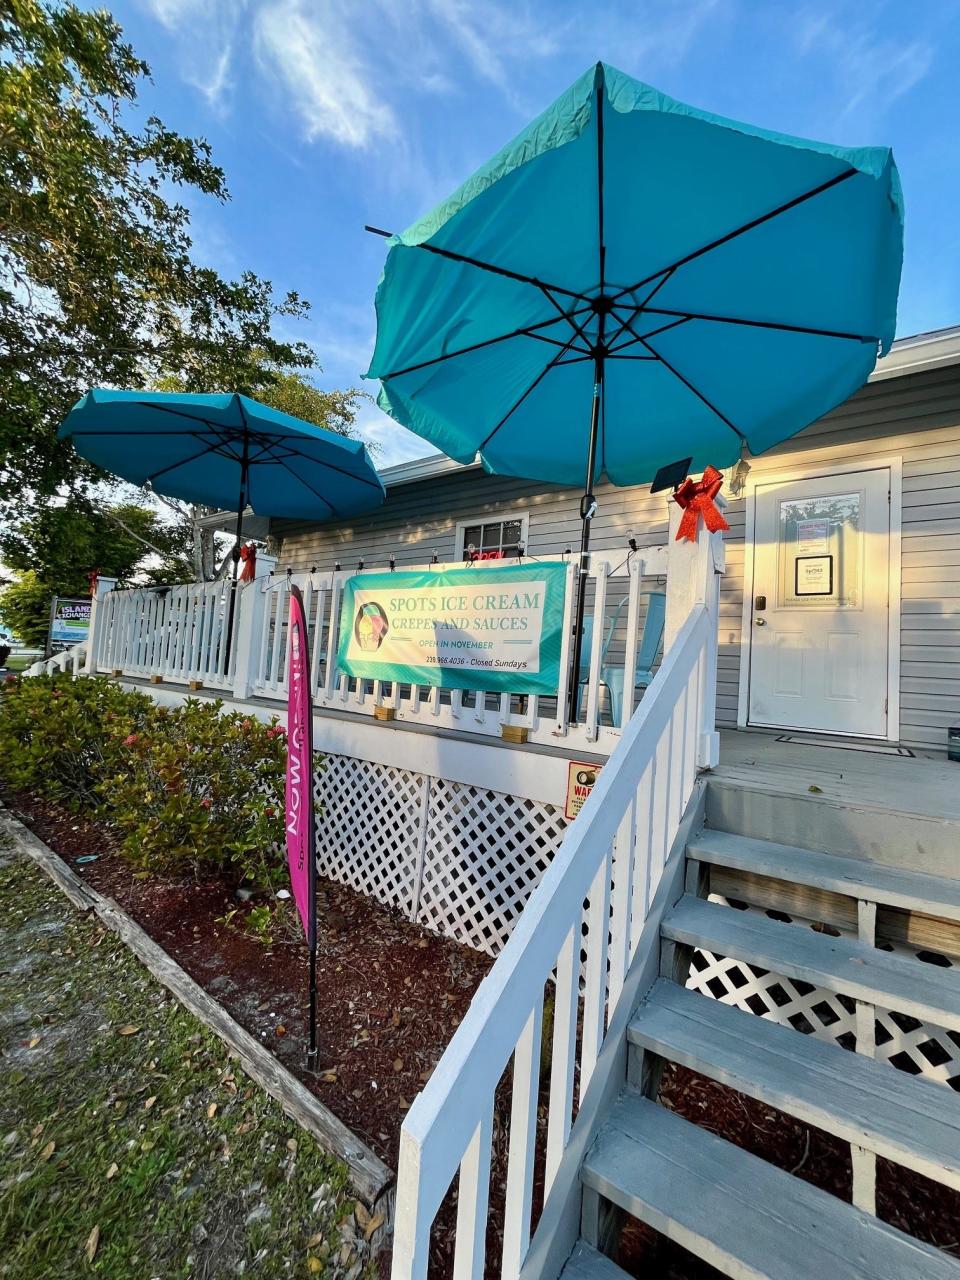 Spots Ice Cream, Crepes & Sauces recently opened in the Island Exchange plaza on Pine Island.